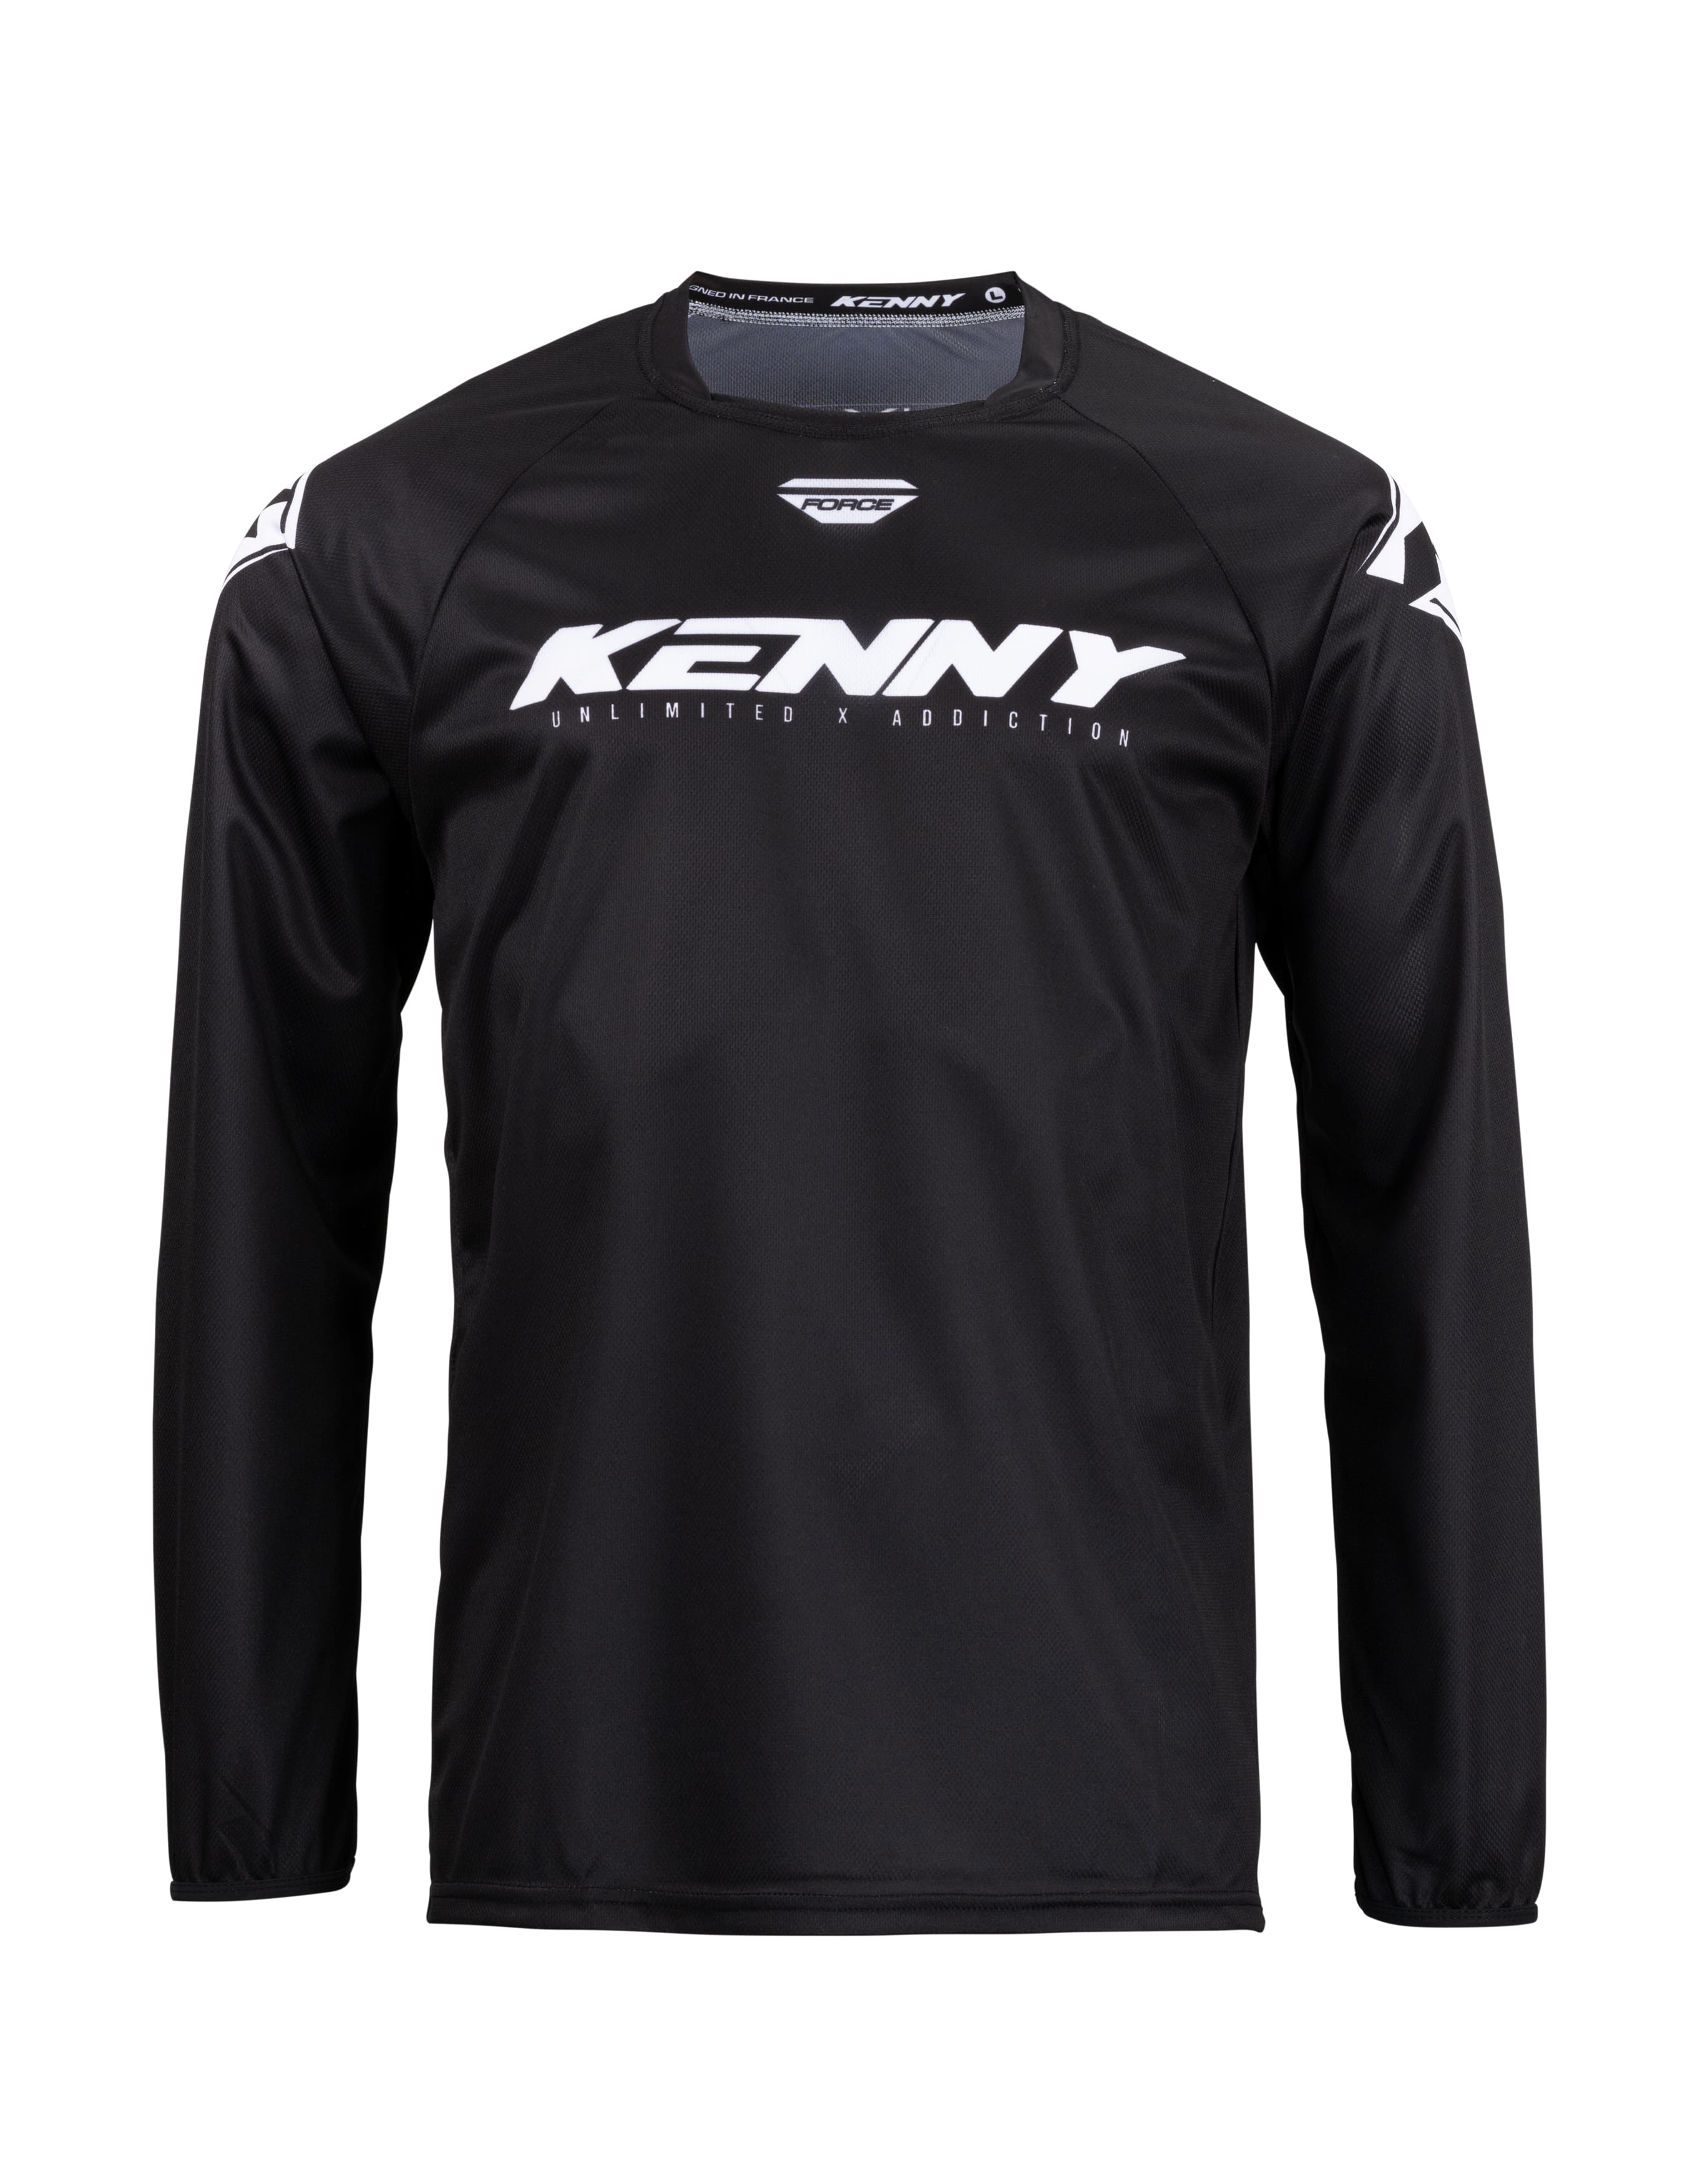 maillot_motocross_kenny_force_black(2)